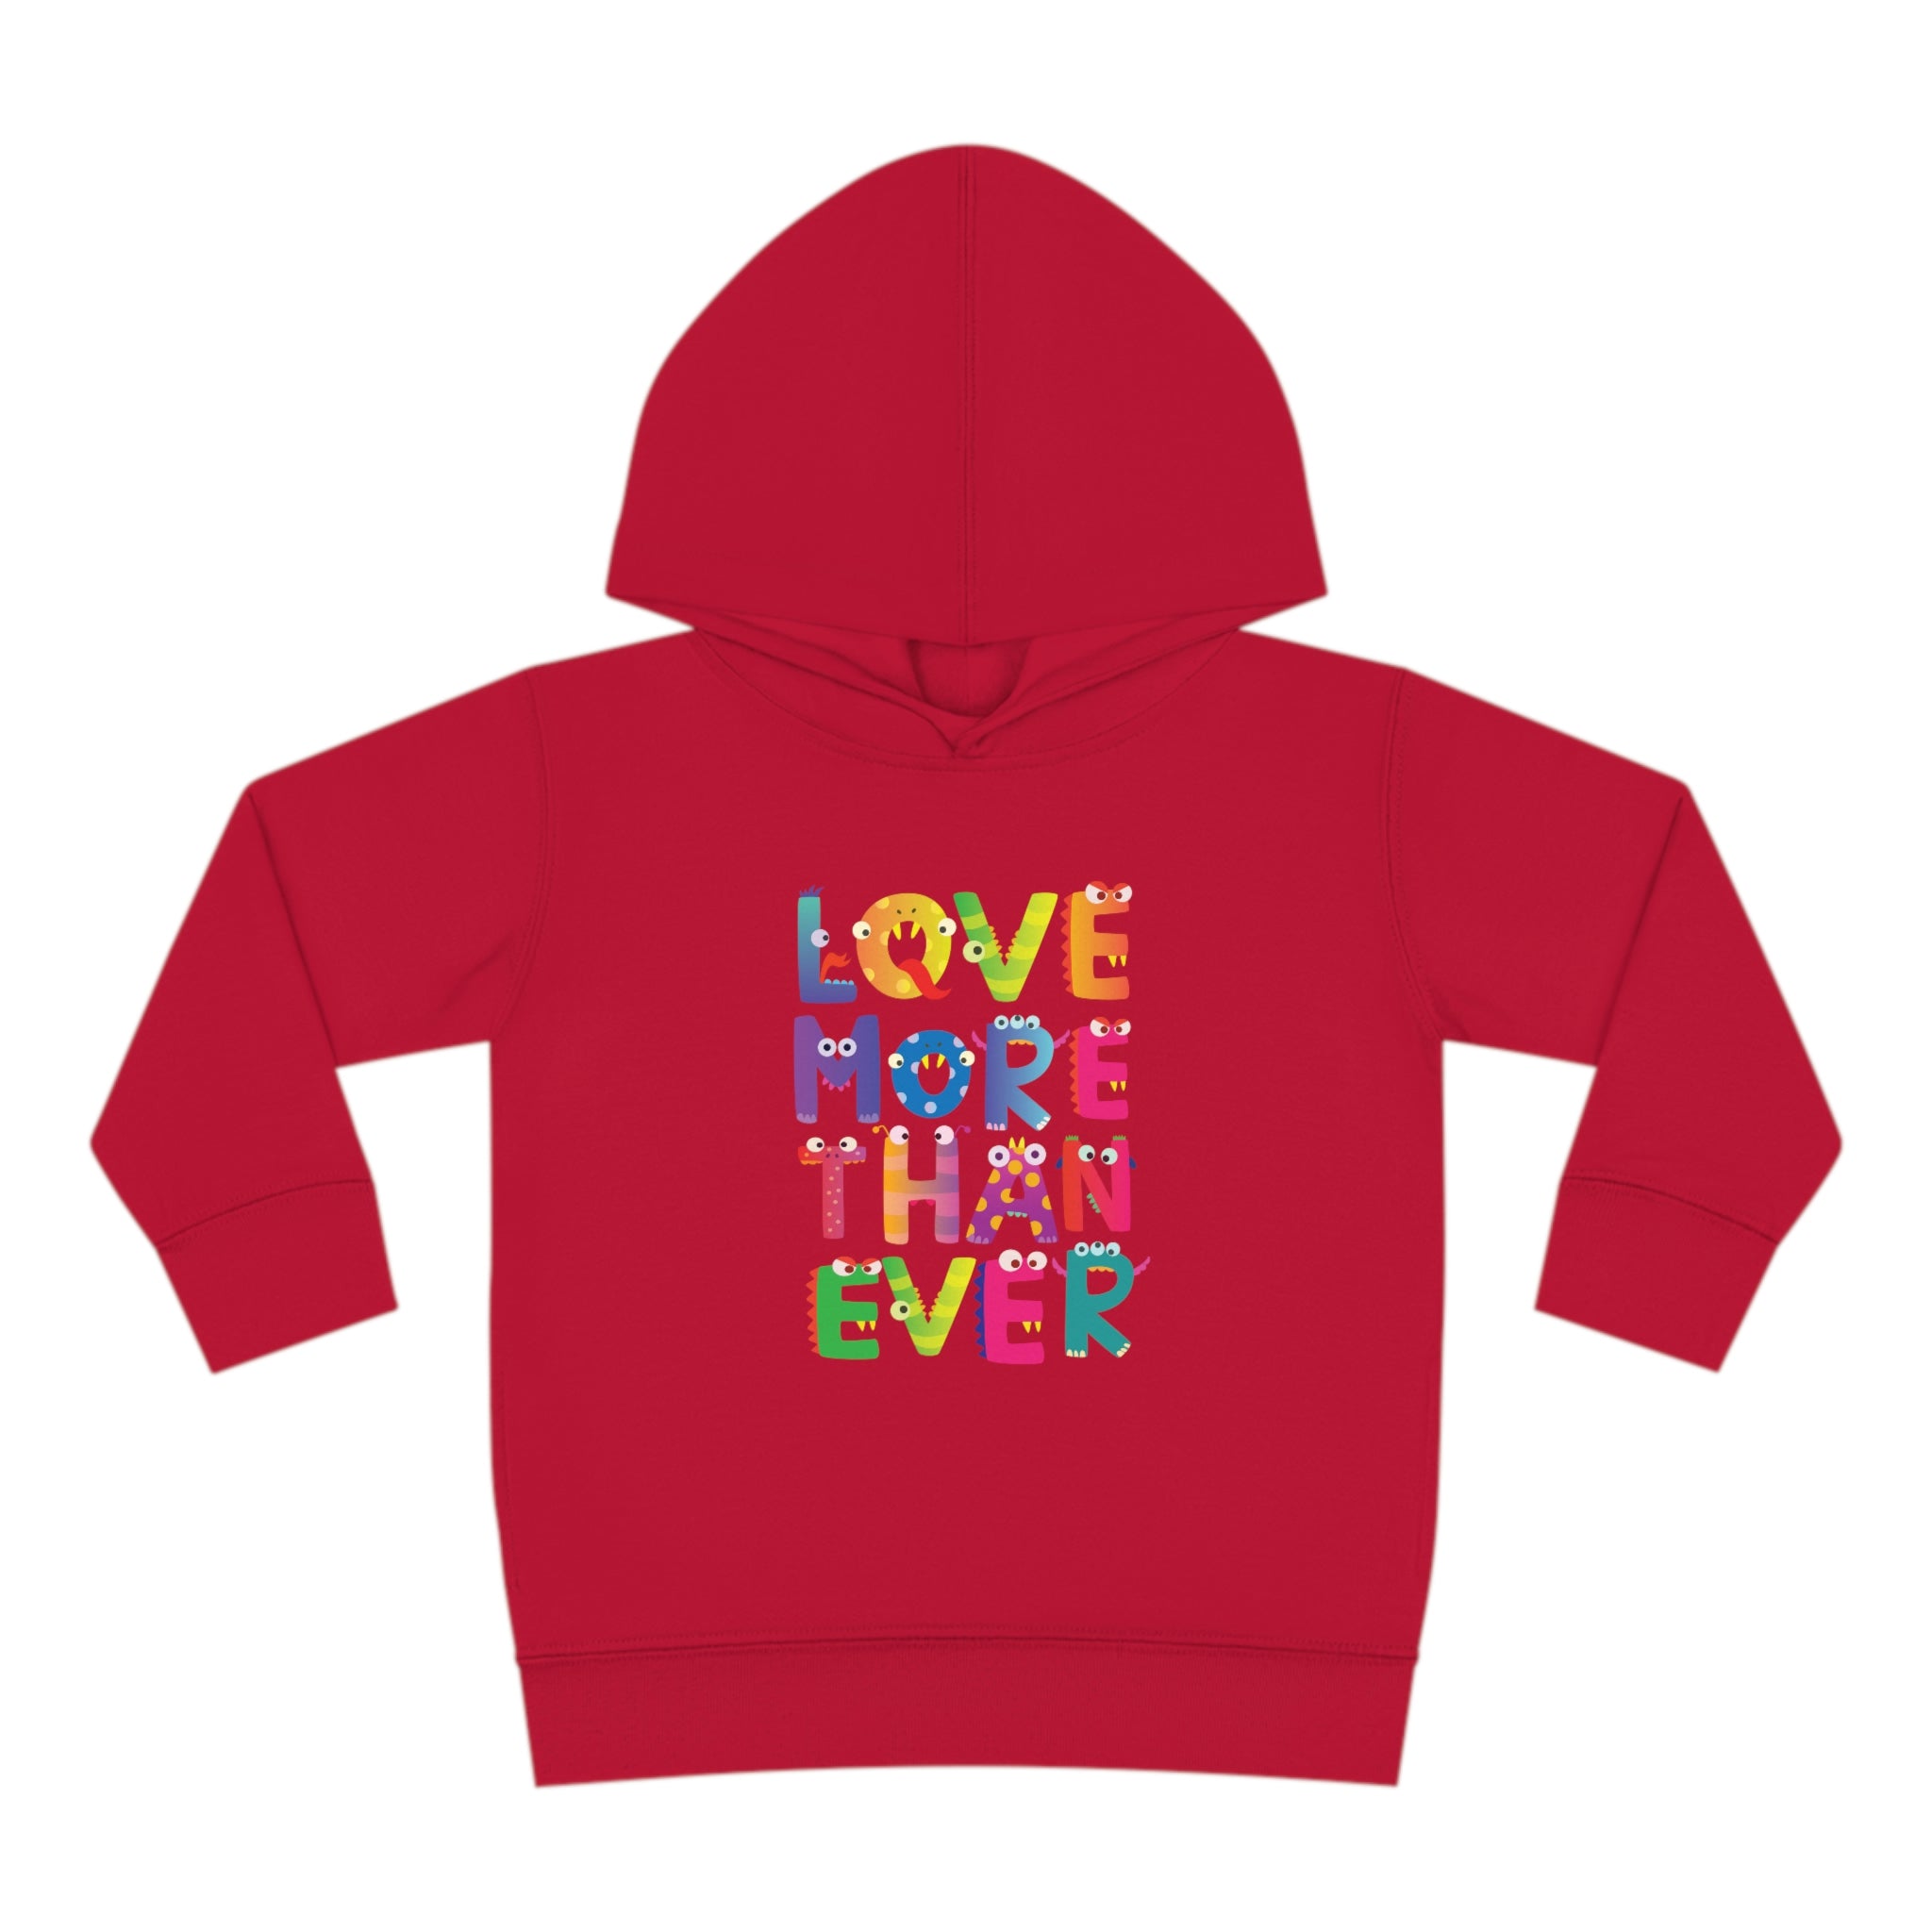 LMTE Monster Toddler Hoodie – Love More Than Ever